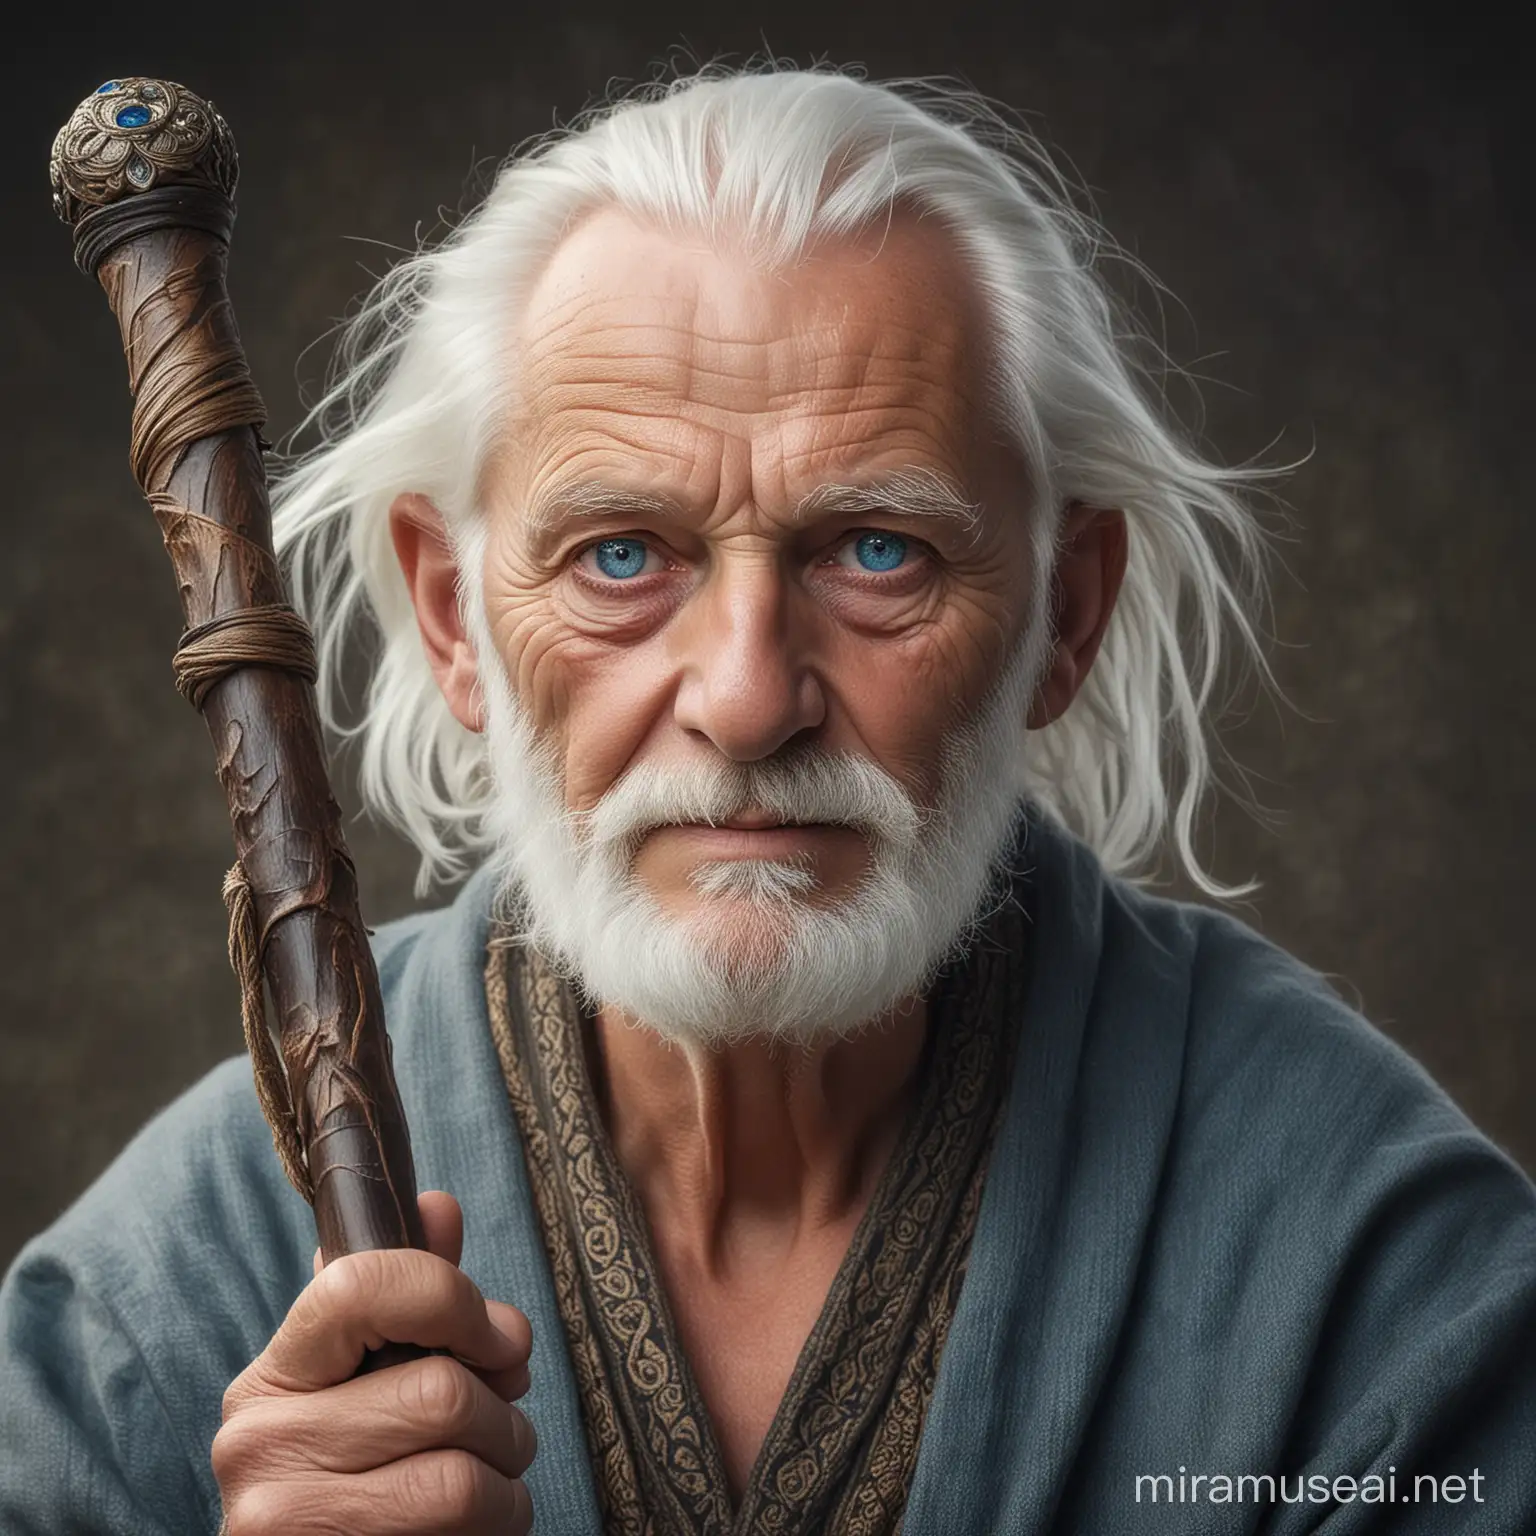 Wise Community Elder with Sparkling Blue Eyes and White Hair